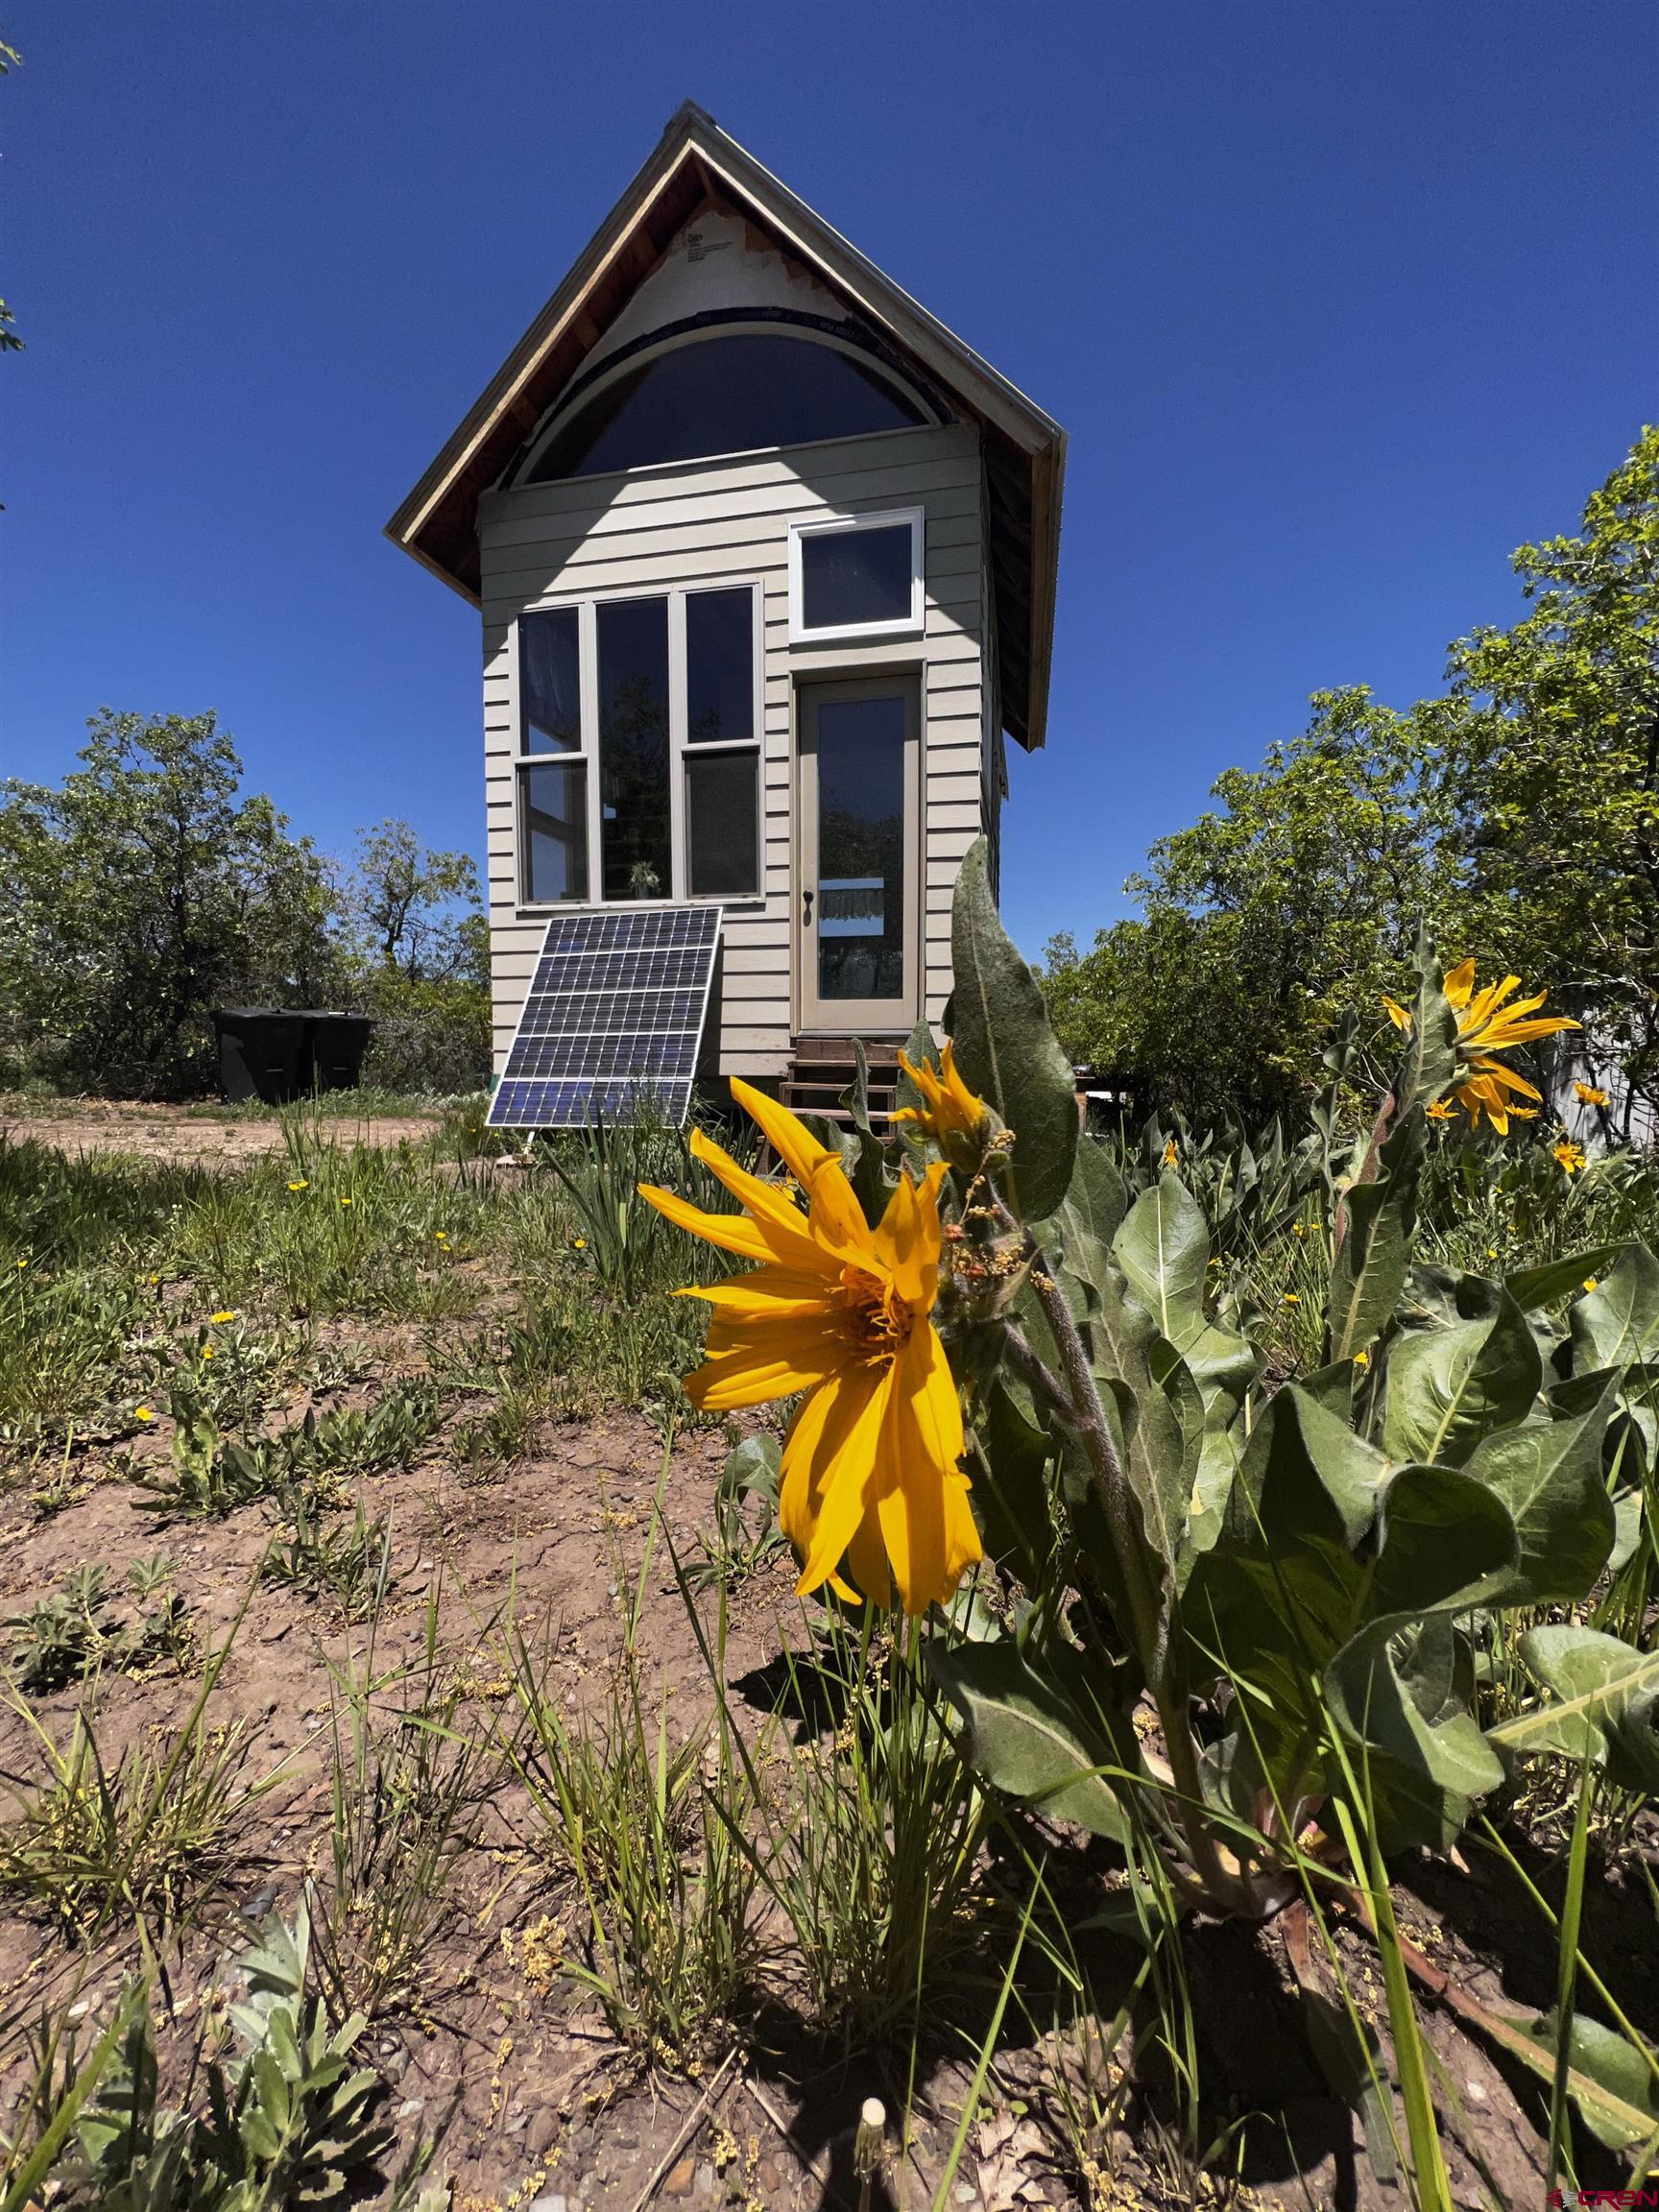 This well finished, adorable tiny house on Hastings Mesa is waiting for you to enjoy. Live here year round, or make this your get-a-way in the mountains. 47 acres total. Looking for the best stargazing location? You have found it! Lots of loving care and thought was put into this cozy home. An upstairs loft bedroom has a crescent window with which to stargaze from bed. A propane wall heater provides all the necessary warmth. Hot running water for showers, dishes, etc. A spacious storage shed for your tools and toys is an added bonus. A viewing stand is available to imagine your future home site overlooking Alder Canyon. Listen to the sounds of Alder Creek from your open windows in the summer. Wide open spaces are a hallmark of the Mesa's. Hike and/ or bike out your front door!  This location on Hastings Mesa is convenient to County Road 56V which is plowed year round. Approx. 25 minutes from Telluride or 25 minutes from Ridgway- your choice! Alder Canyon Rd has been kept plowed in the recent past for year round access.